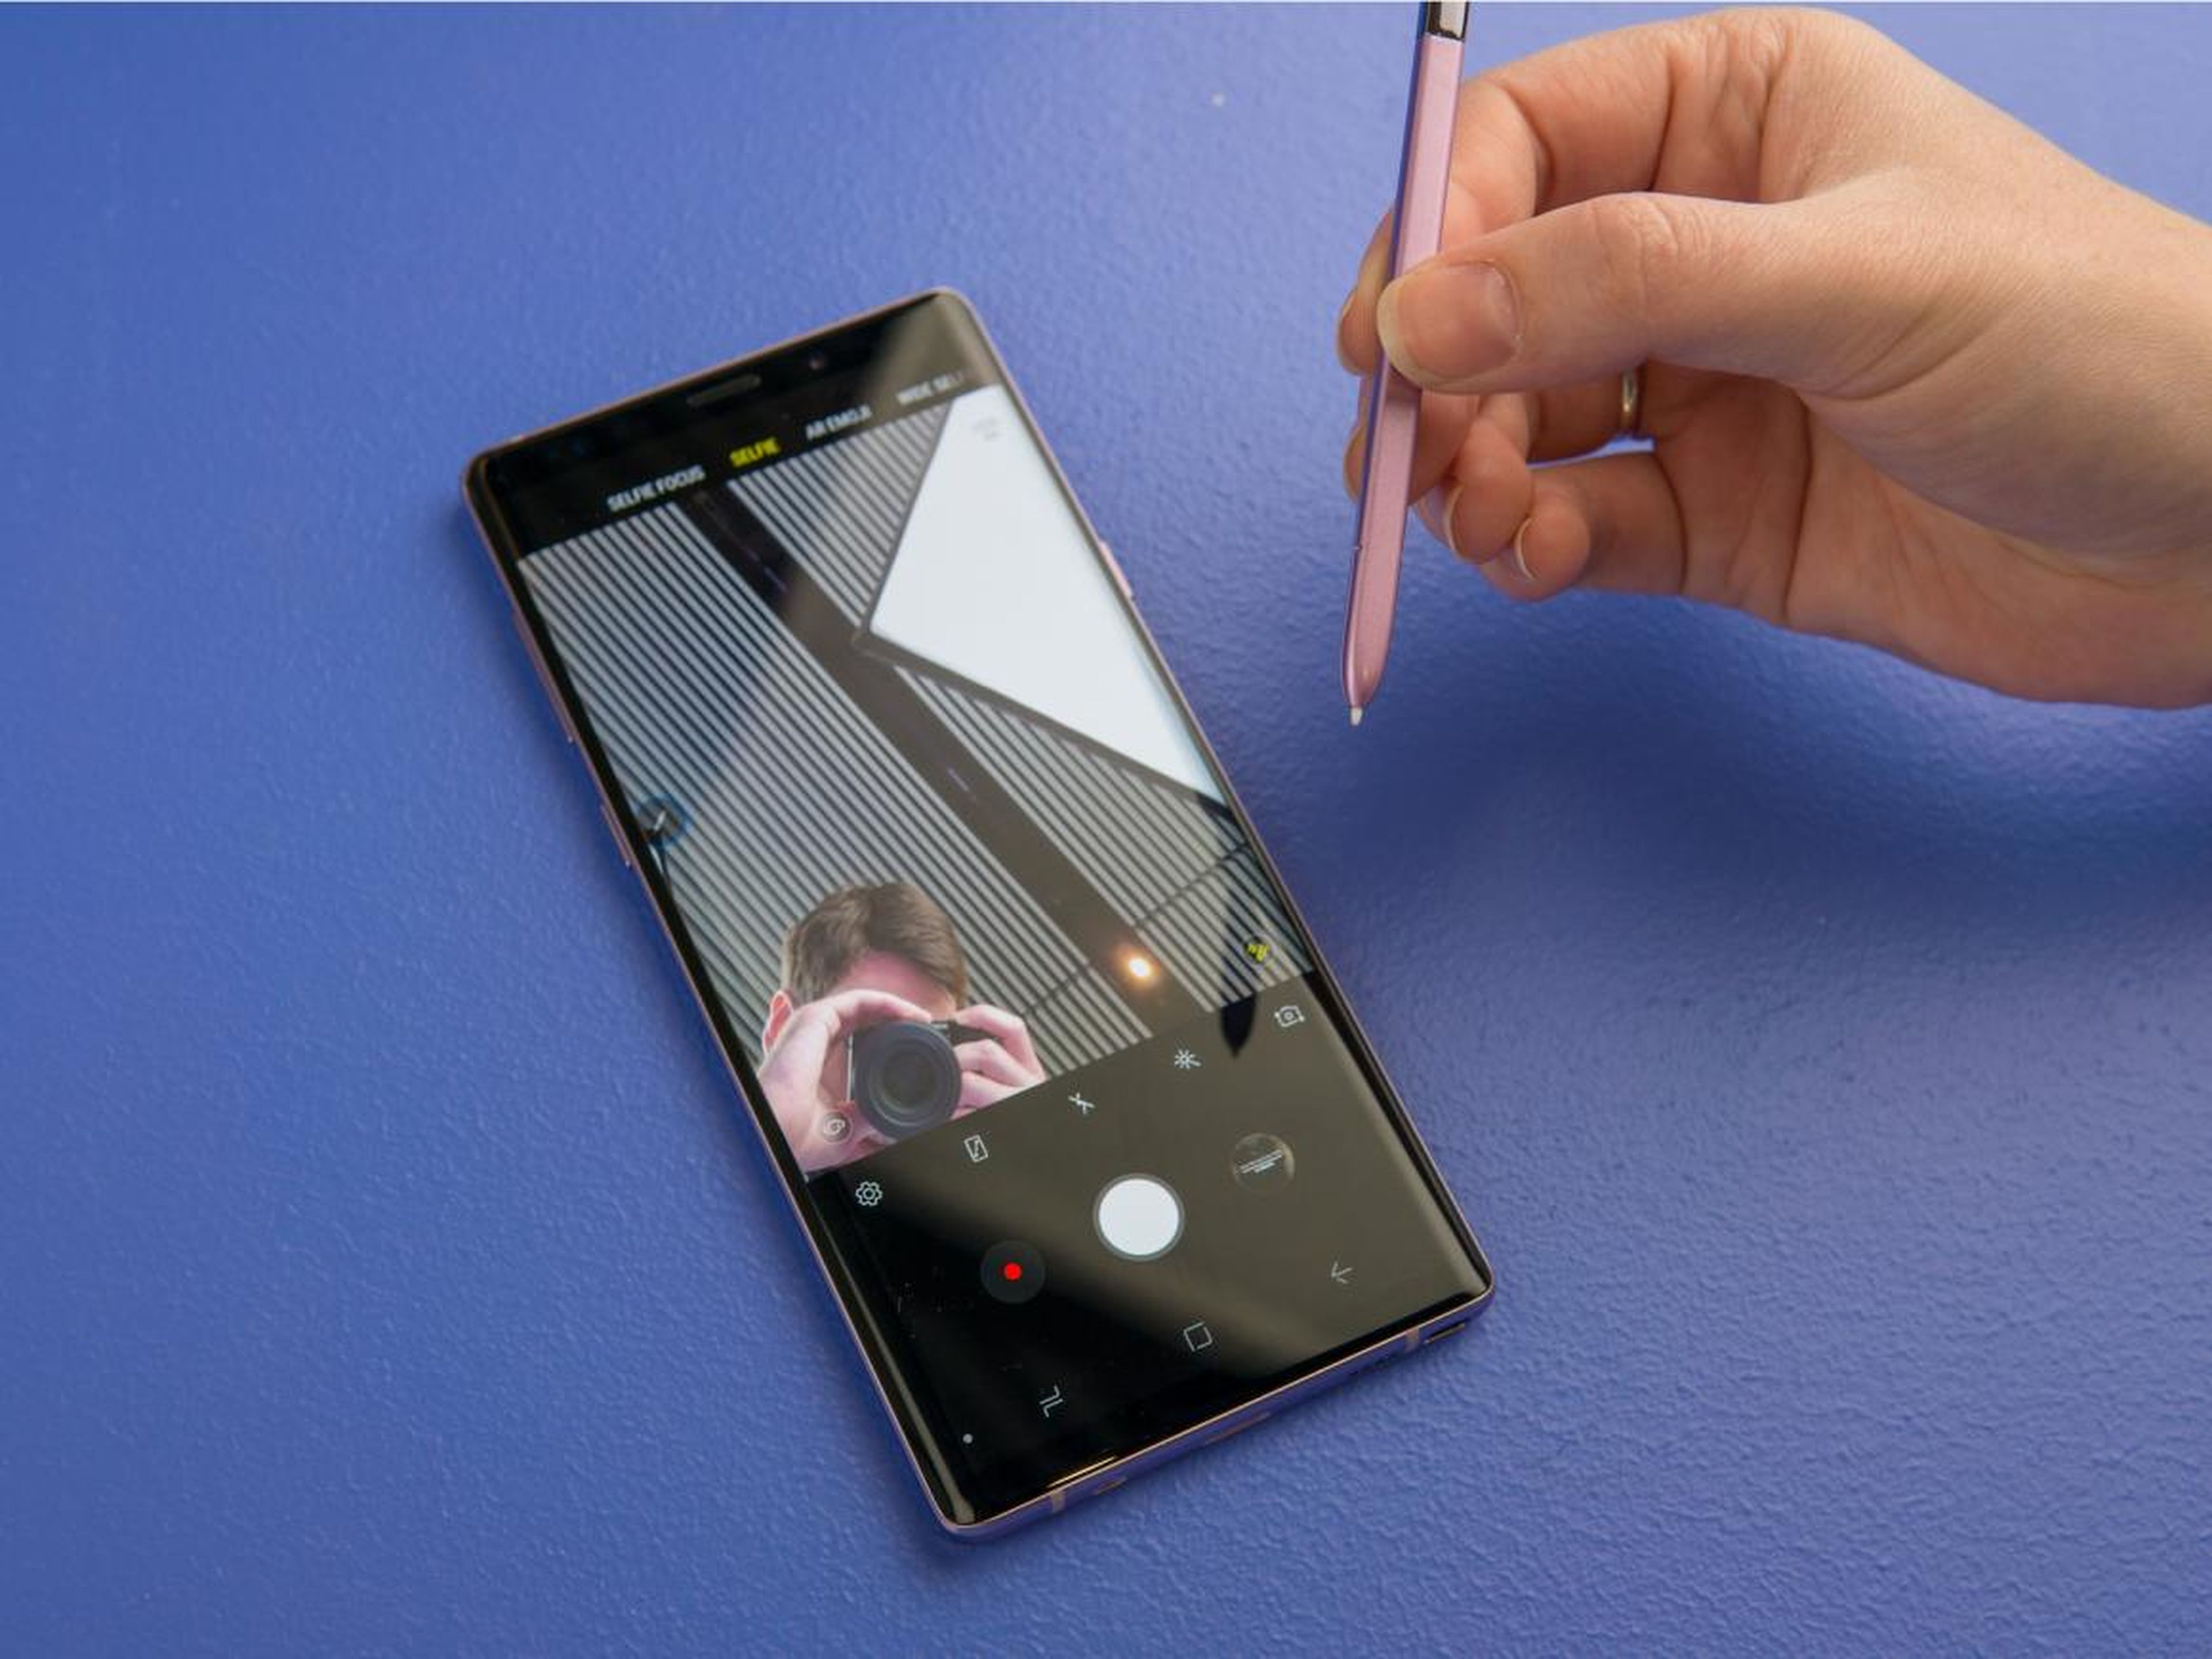 The Galaxy Note 9's S Pen is a nice extra if you want to use it.